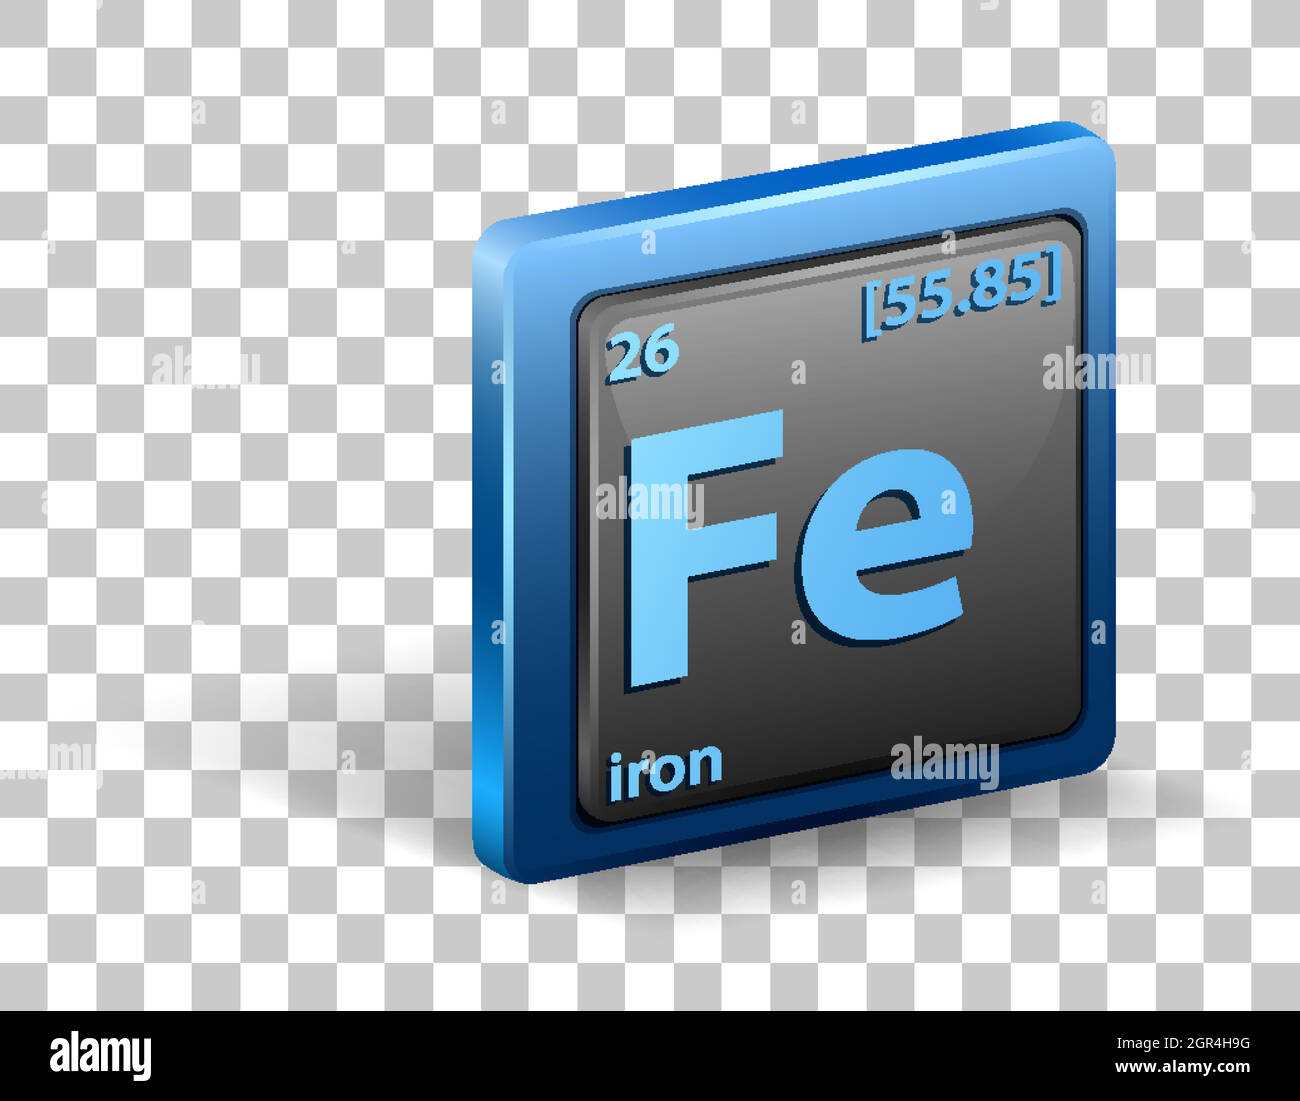 Iron Chemical Element Chemical Symbol With Atomic Number And Atomic